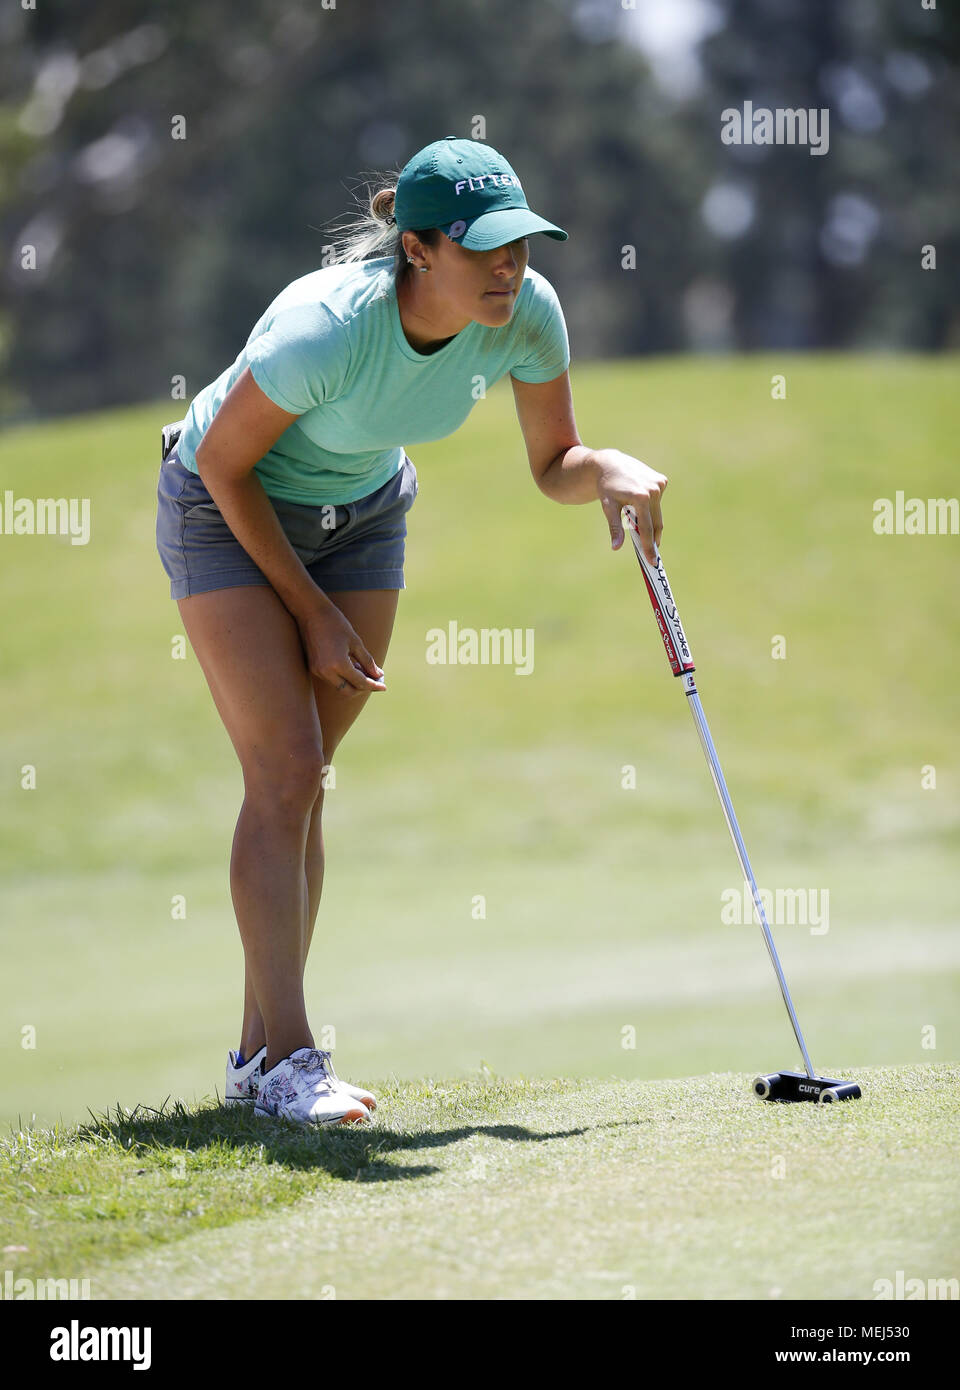 Los Angeles, California, USA. 22nd Apr, 2018. Jaye Marie Green of USA, in actions during the final round of the HUGEL-JTBC LA Open LPGA golf tournament at Wilshire Country on April 22, 2018, in Los Angeles. Moriya Jutanugarn of Thailand won the tournament. Credit: Ringo Chiu/ZUMA Wire/Alamy Live News Stock Photo